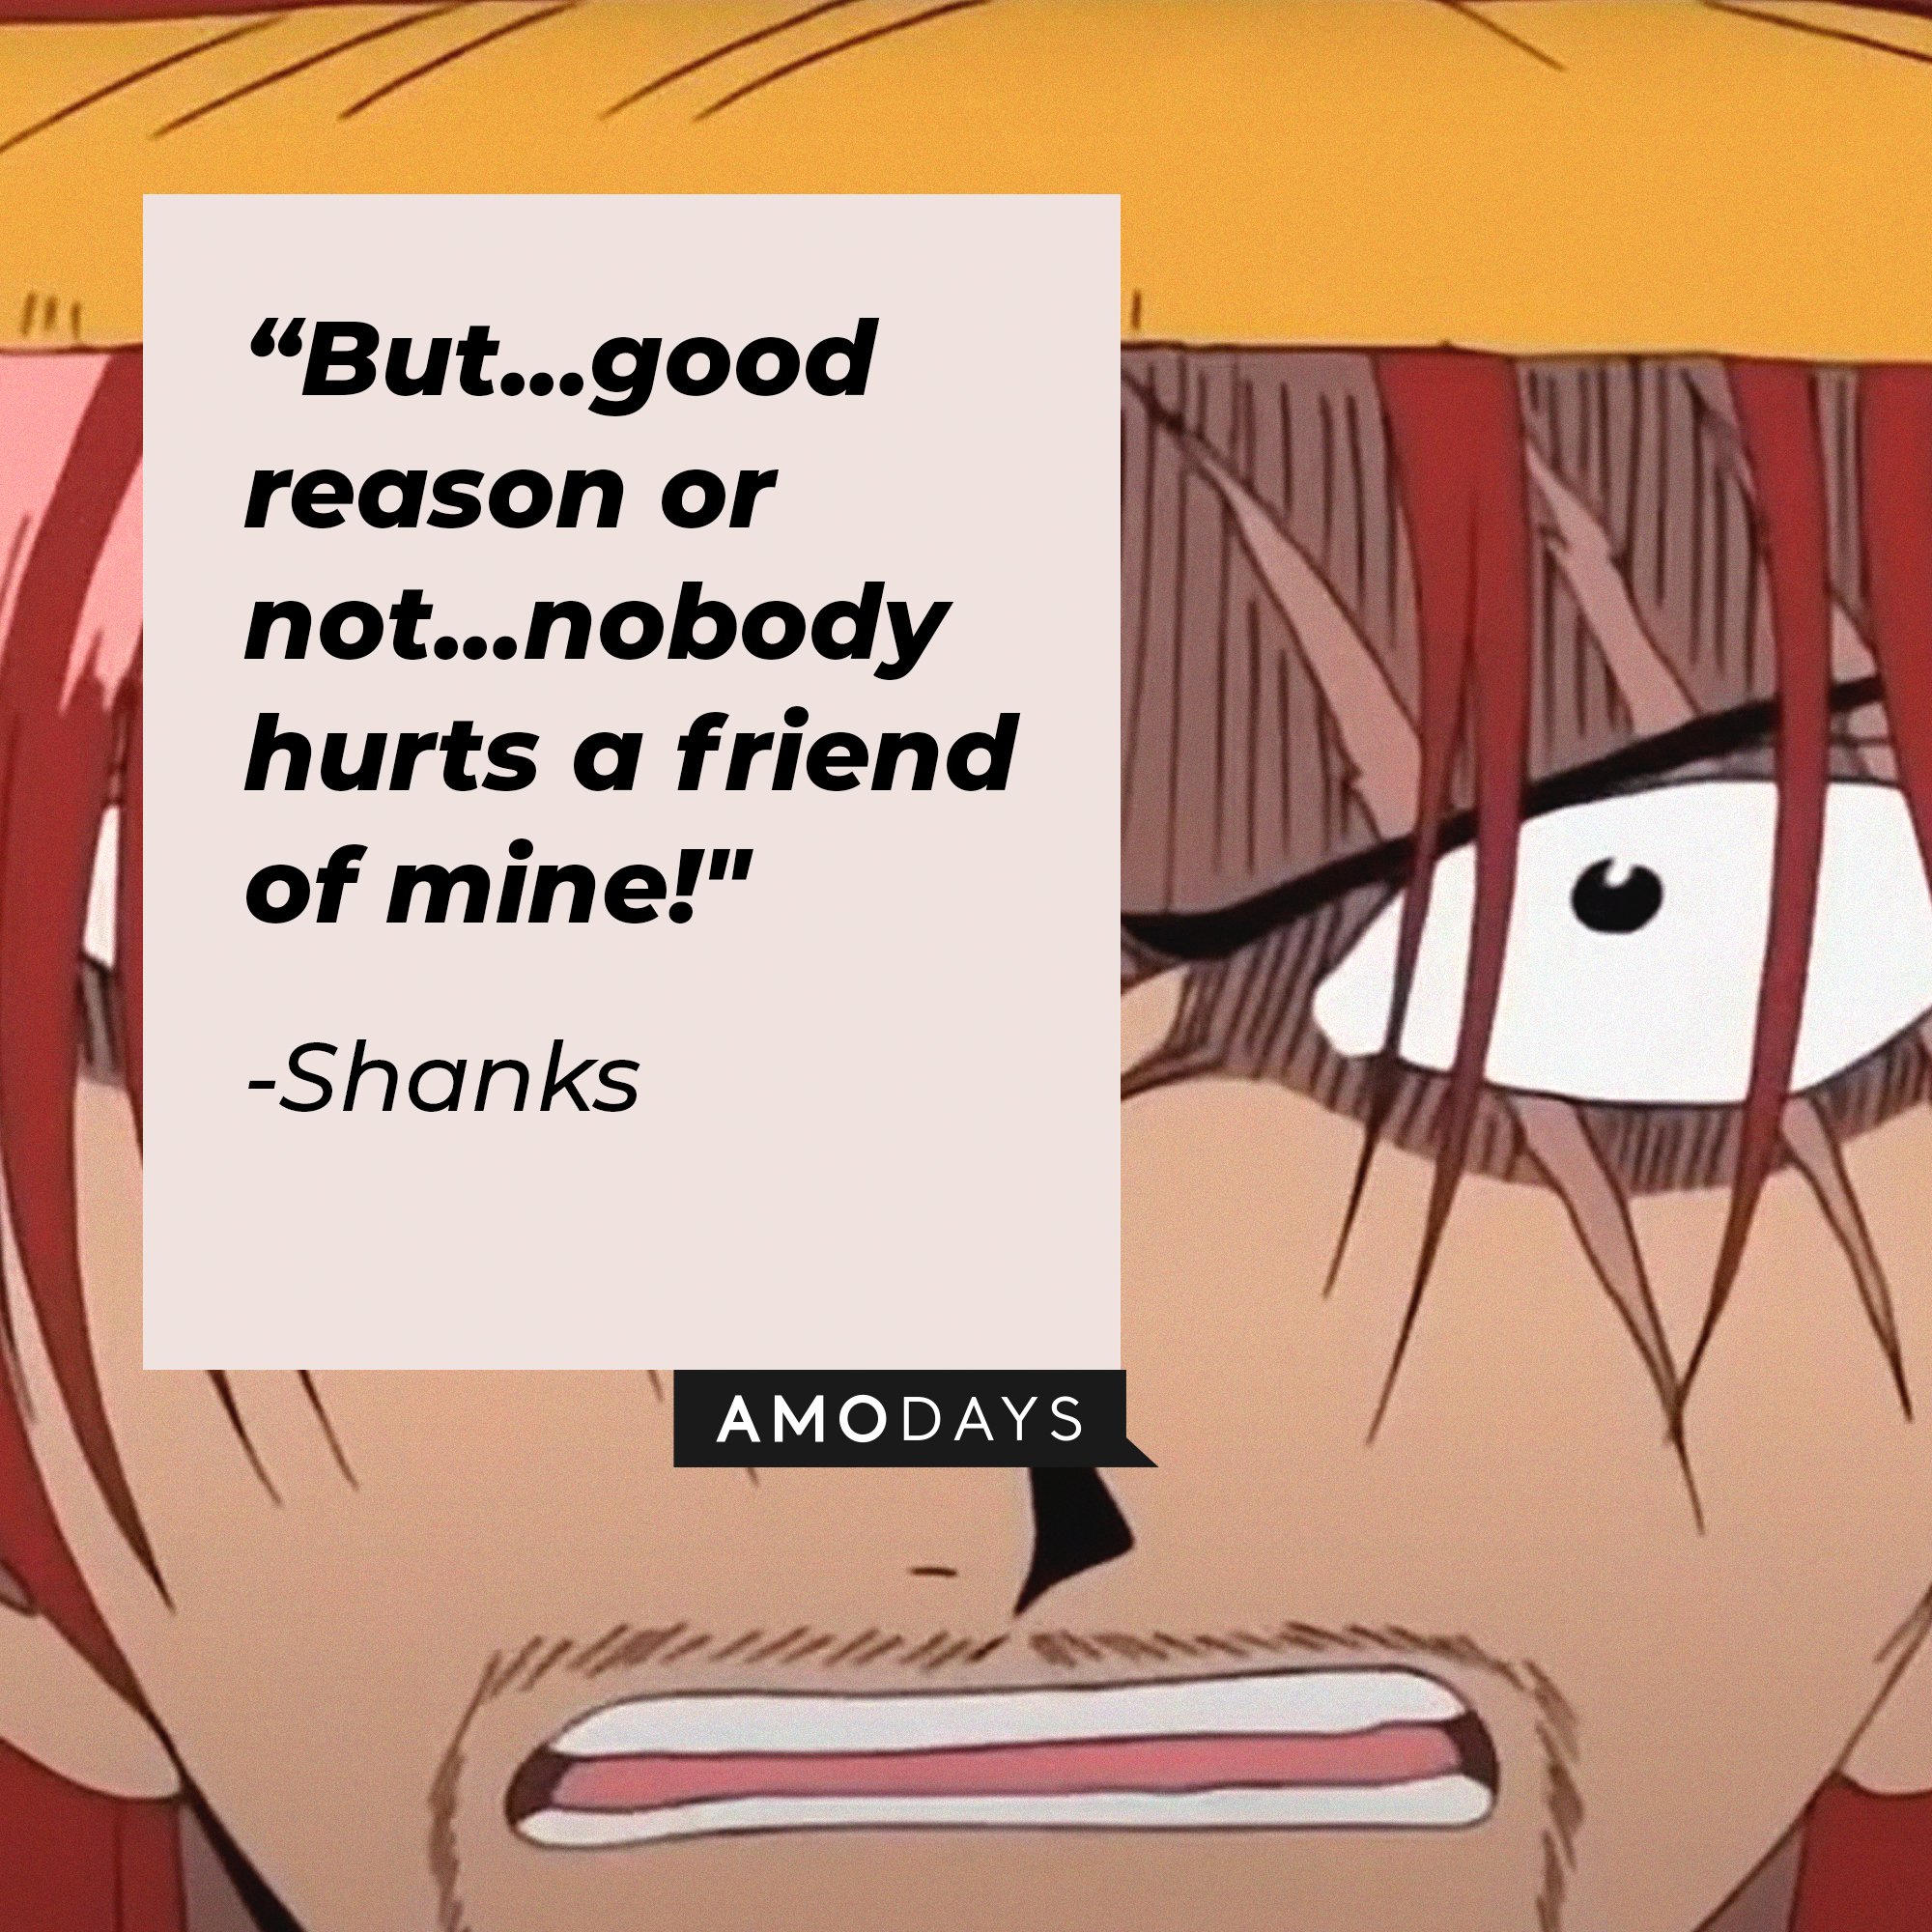 Shanks' quote: "But...good reason or not...nobody hurts a friend of mine!" | Image: AmoDays